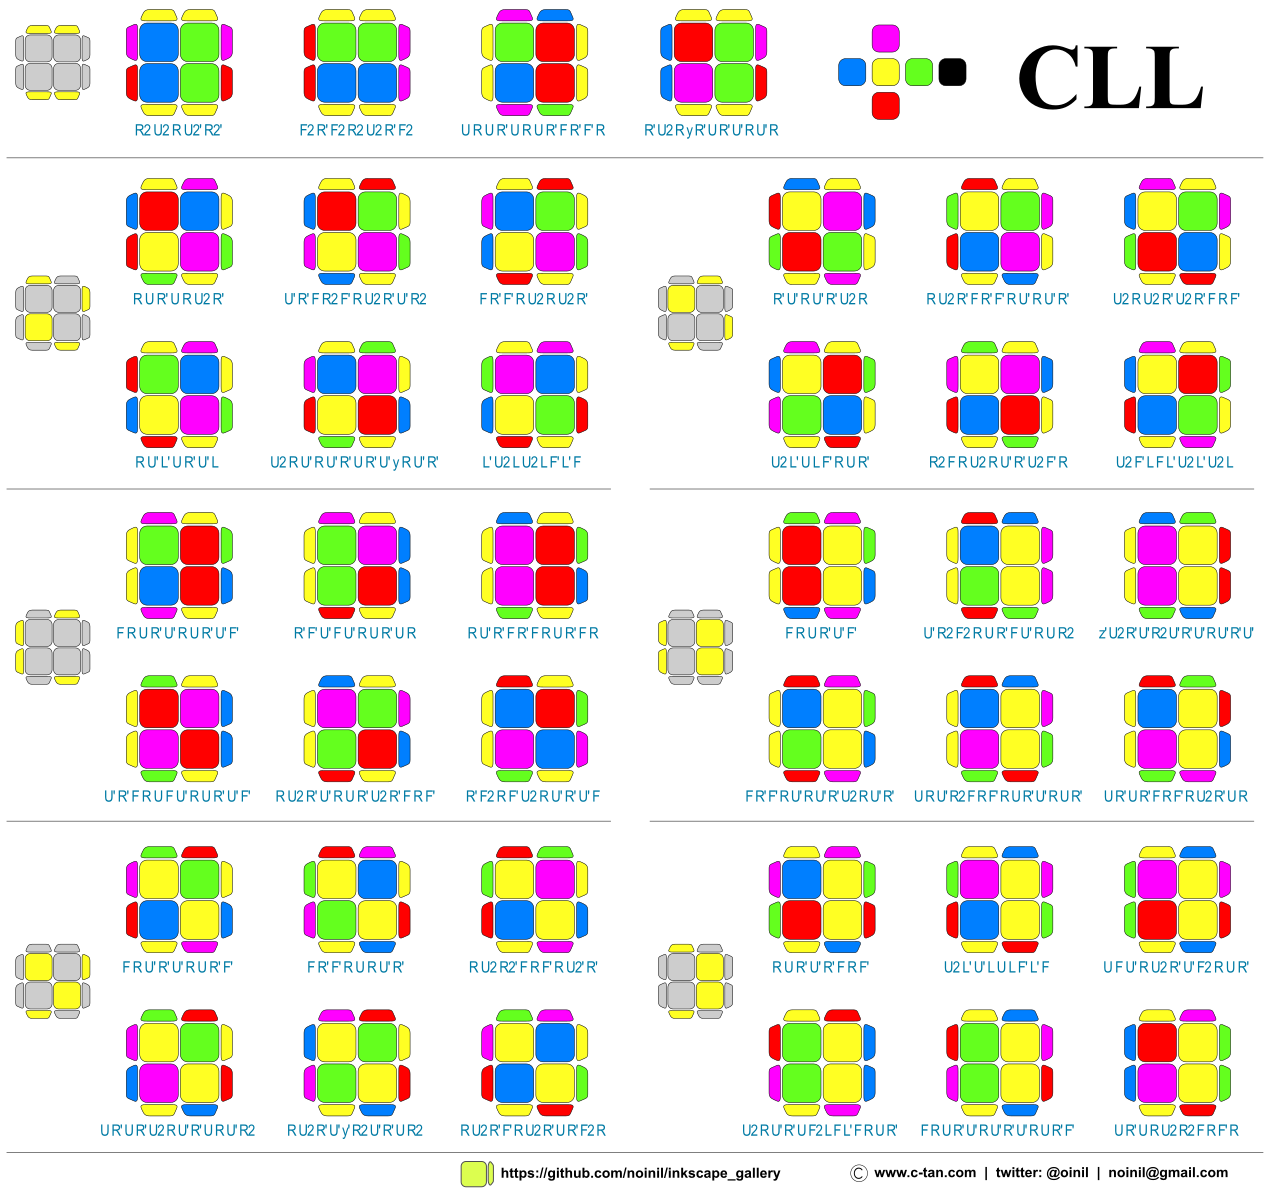 ...(CLL), is a method that solves the last layer corners of a pocket cube (...